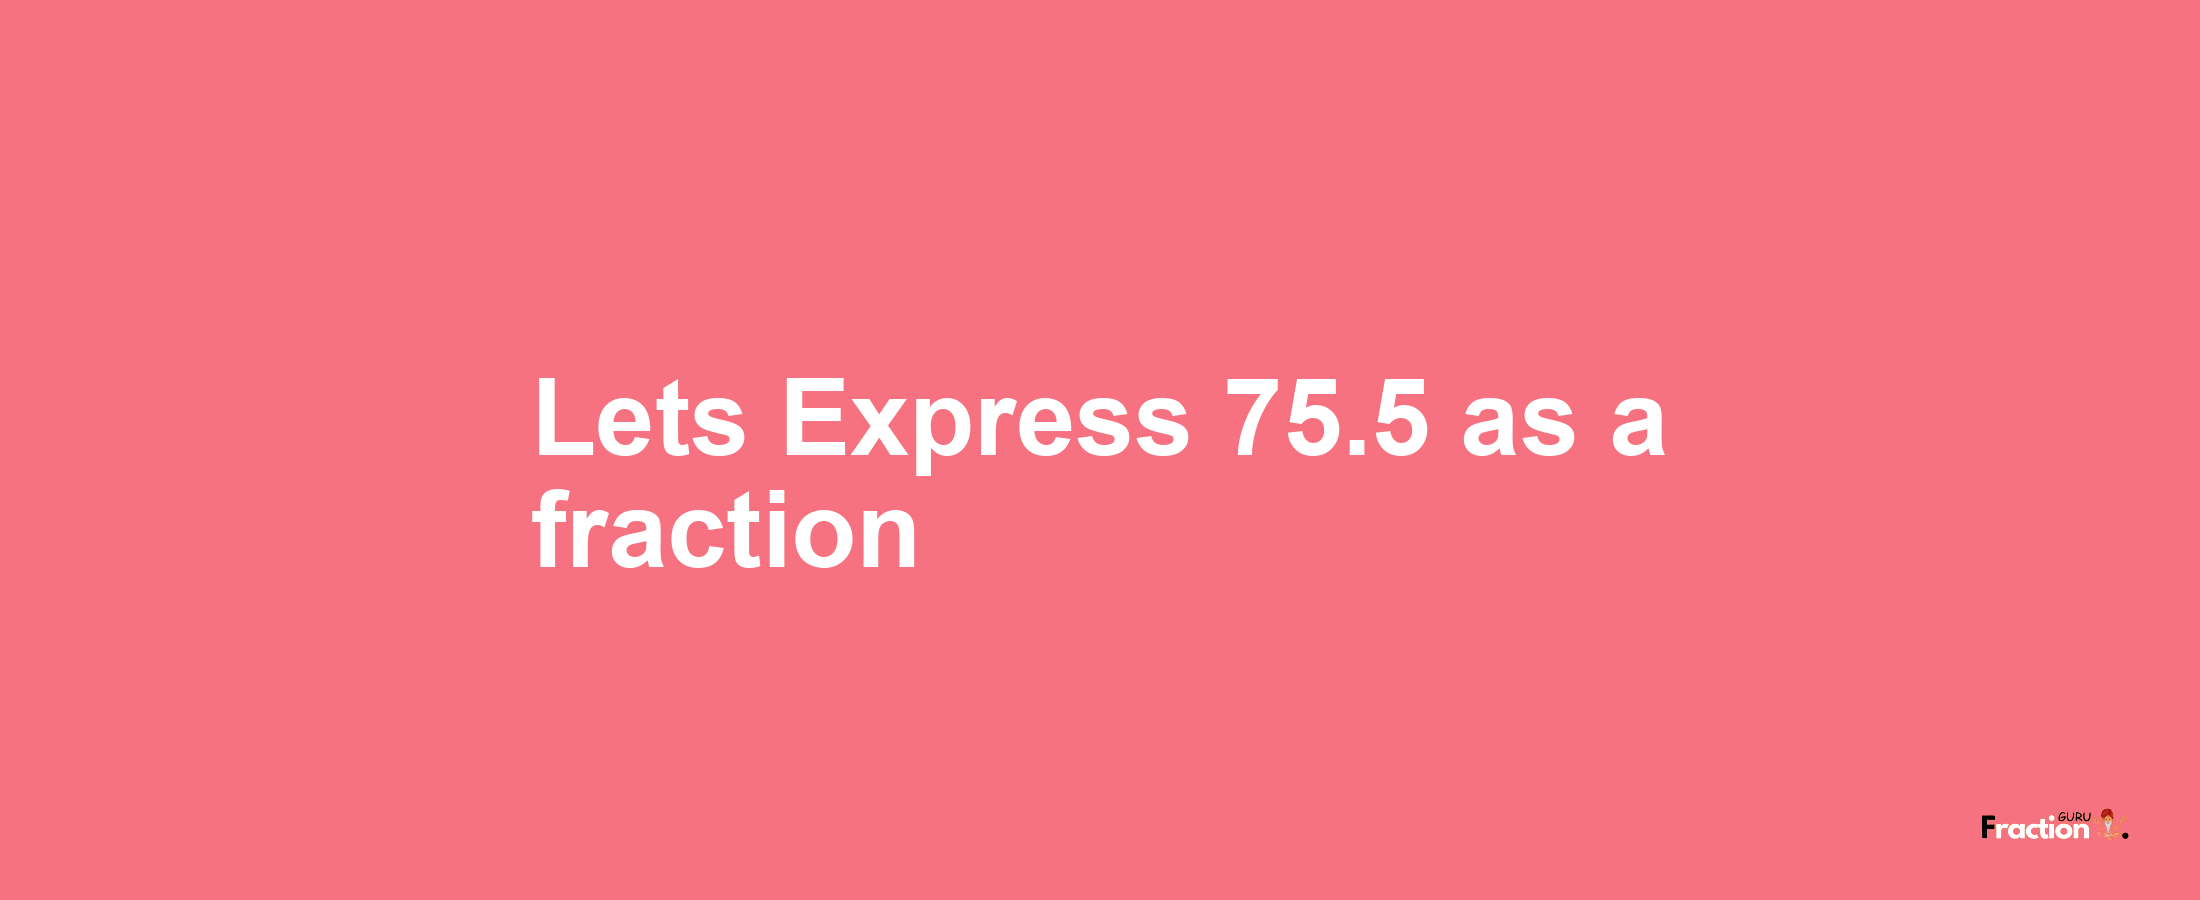 Lets Express 75.5 as afraction